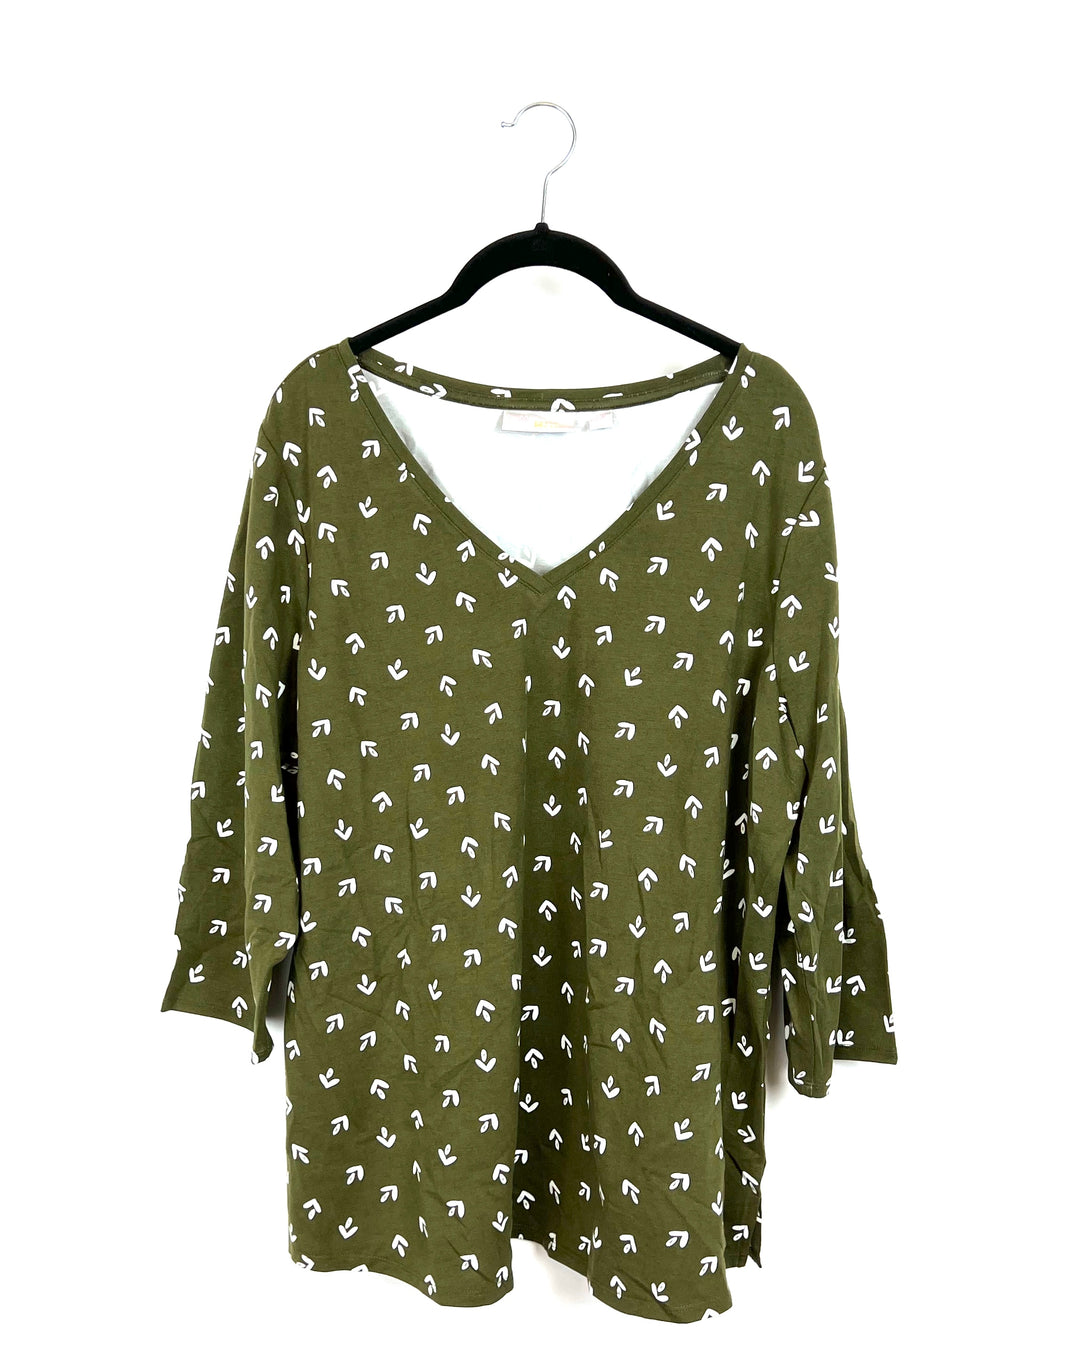 Green Abstract Top - Large/Extra Large